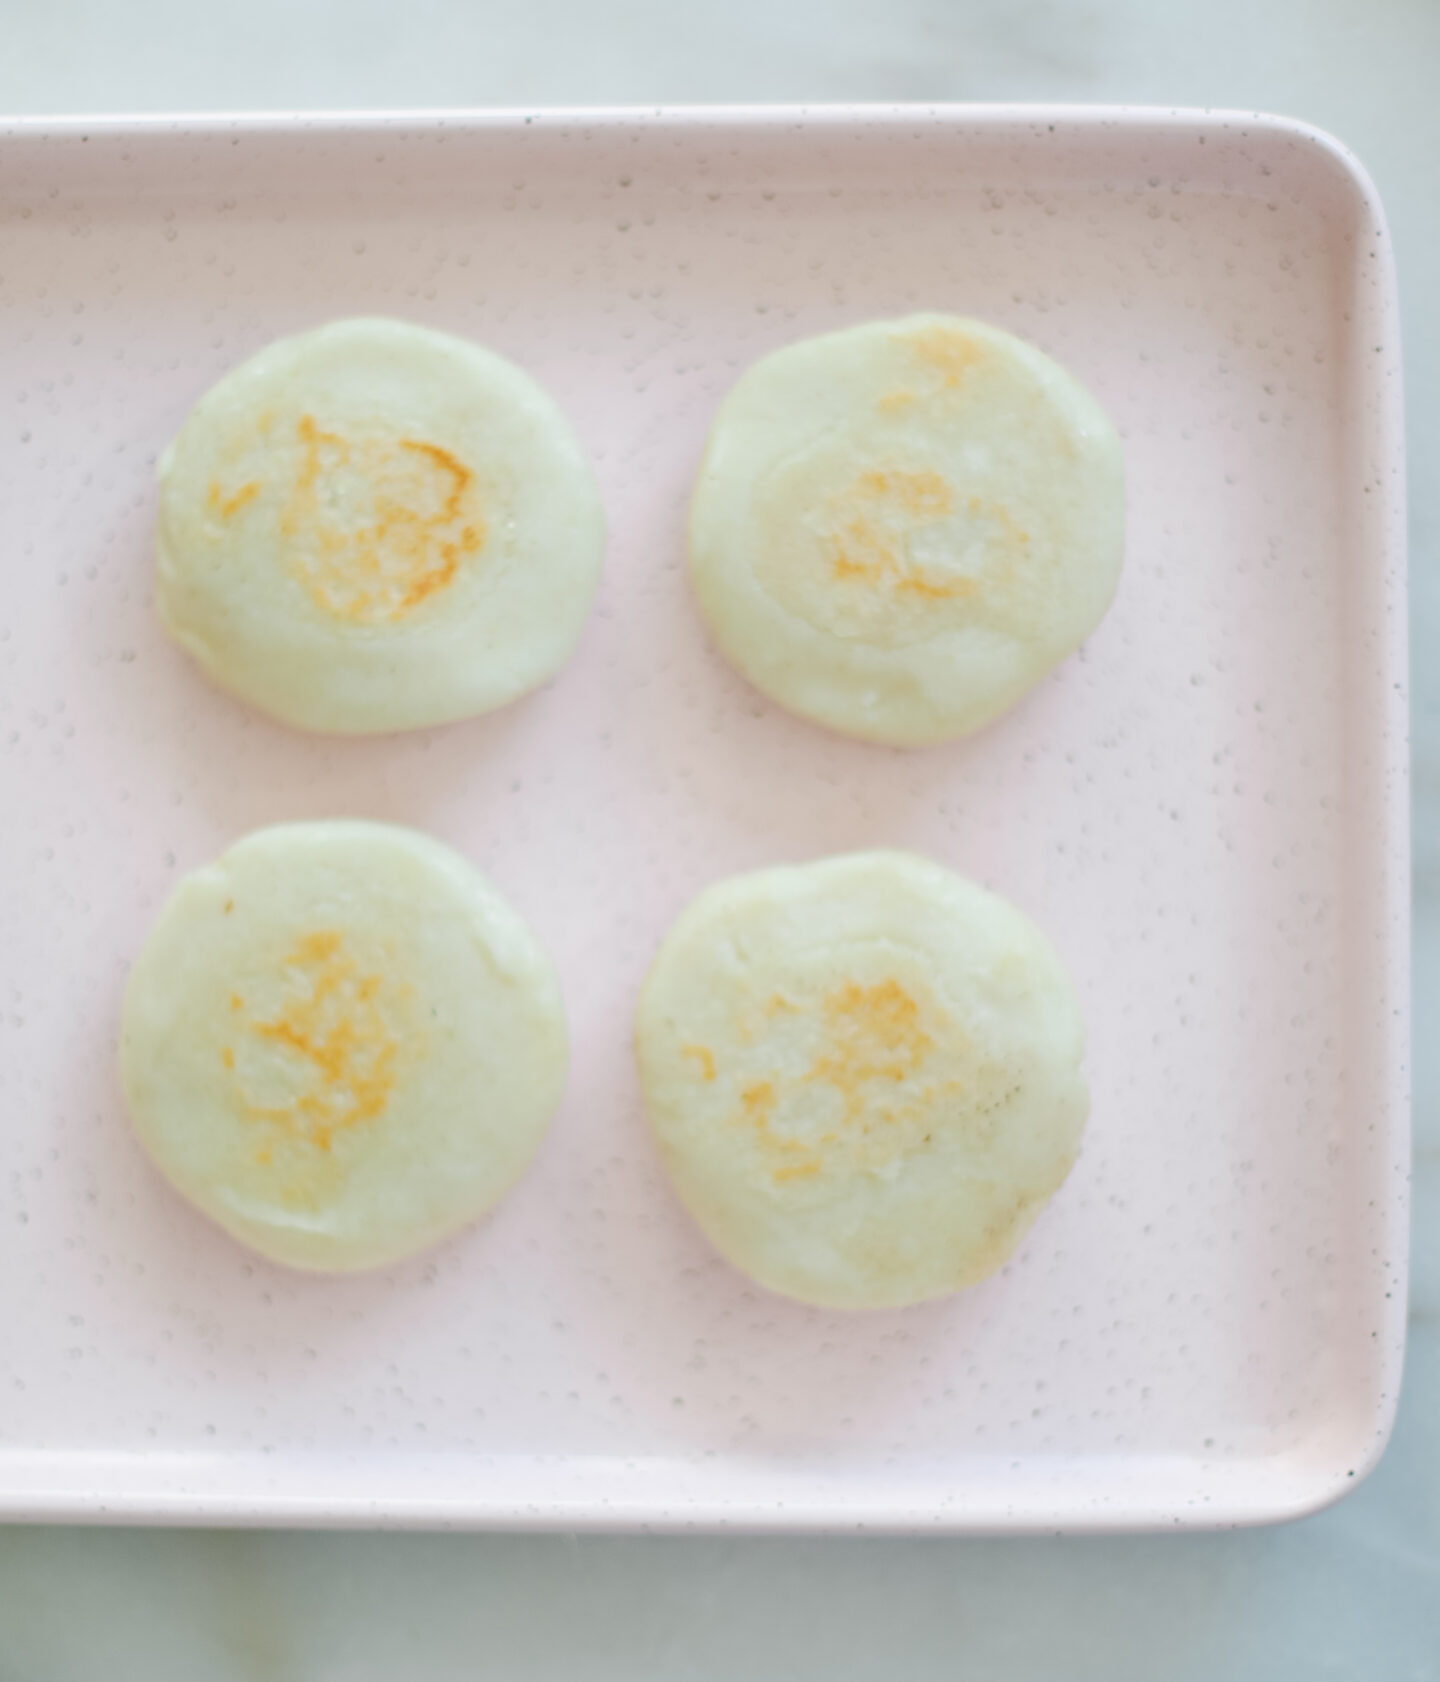 How to prepare Arepas with only three ingredients